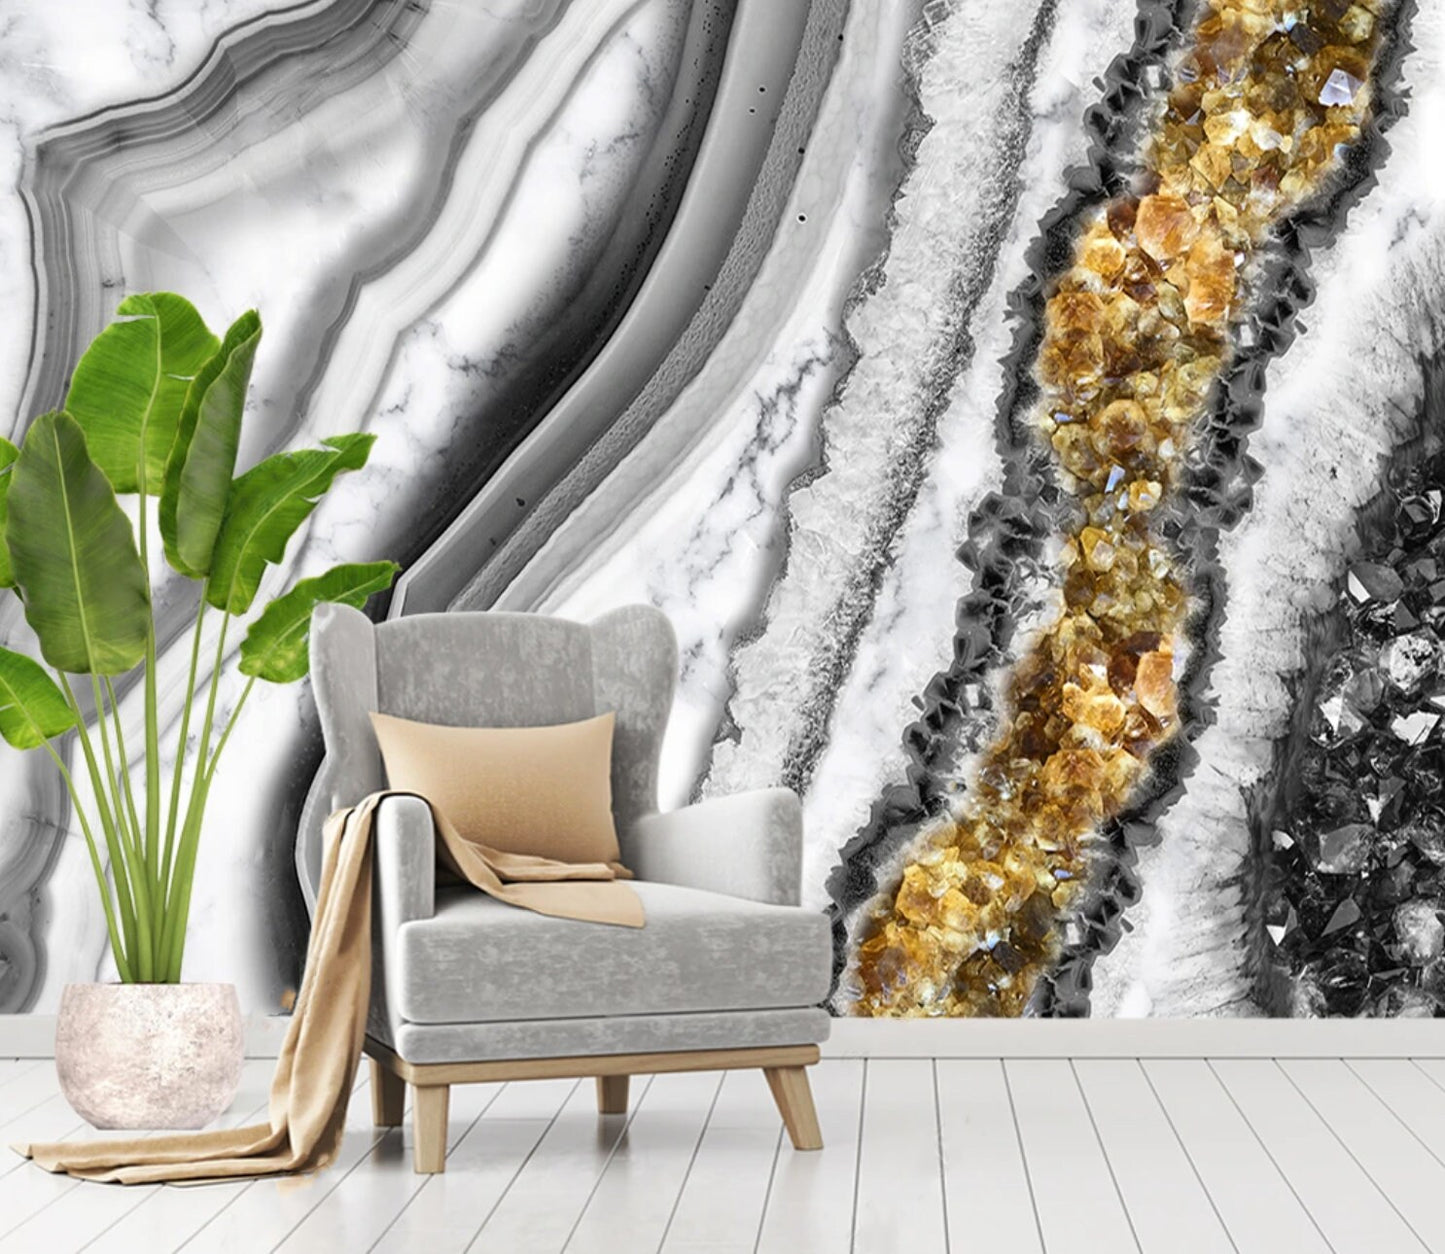 Marble wallpaper peel and stick Grey marble wallpaper Art deco wallpaper Peel and stick Wall mural prints Home wall decor